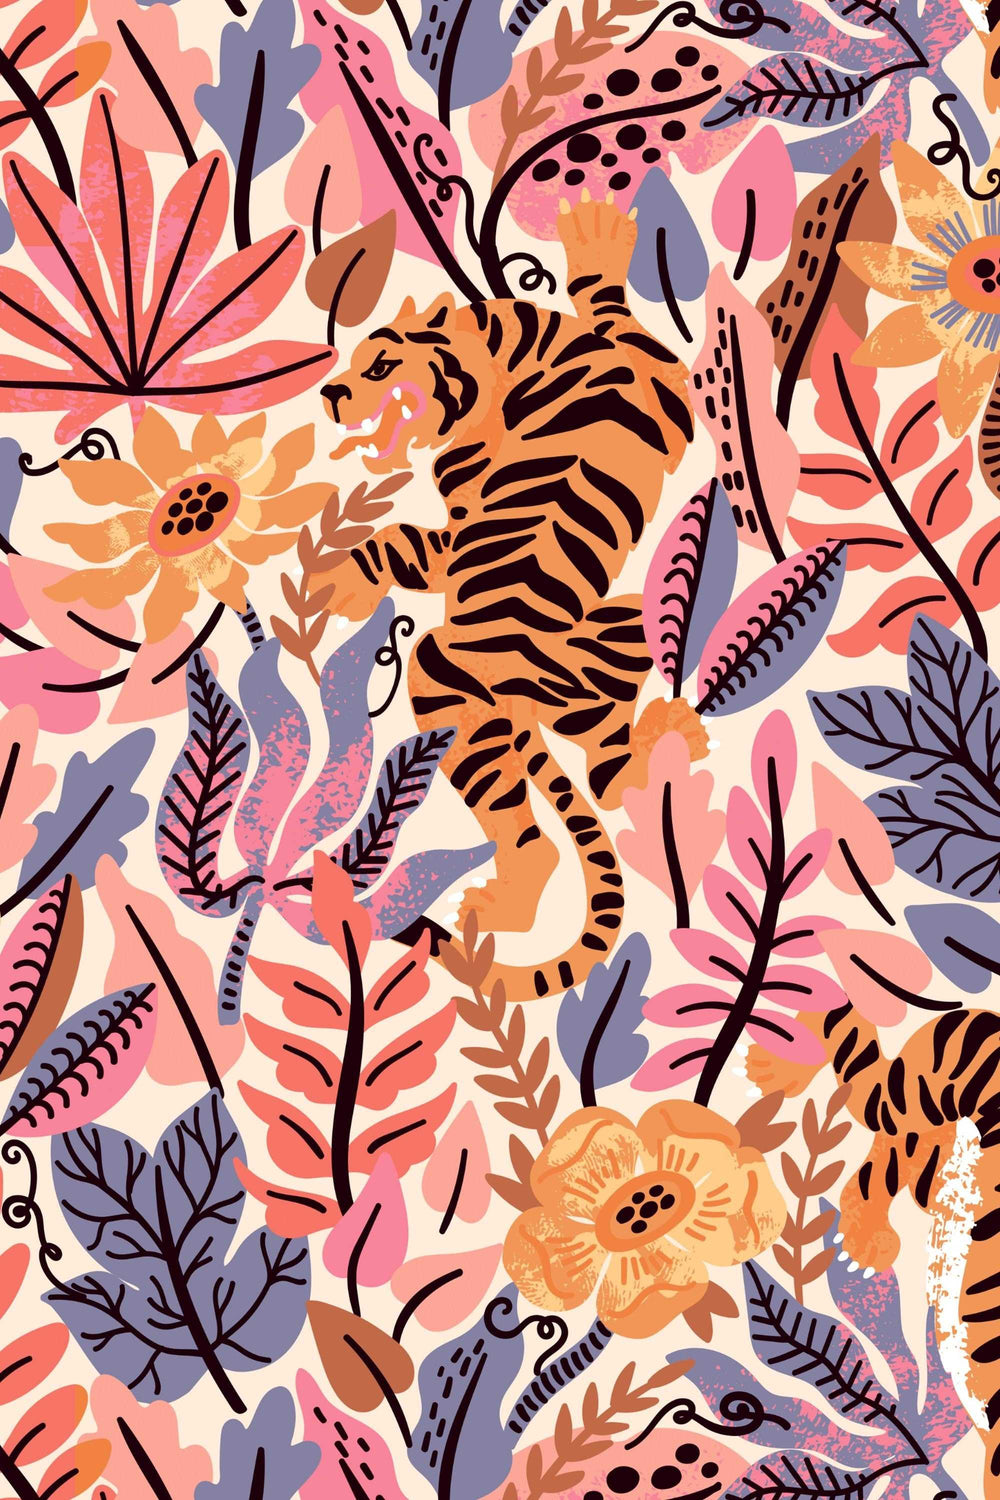 Tiger in the Woods Peel & Stick Wallpaper - Removable Self Adhesive #3096